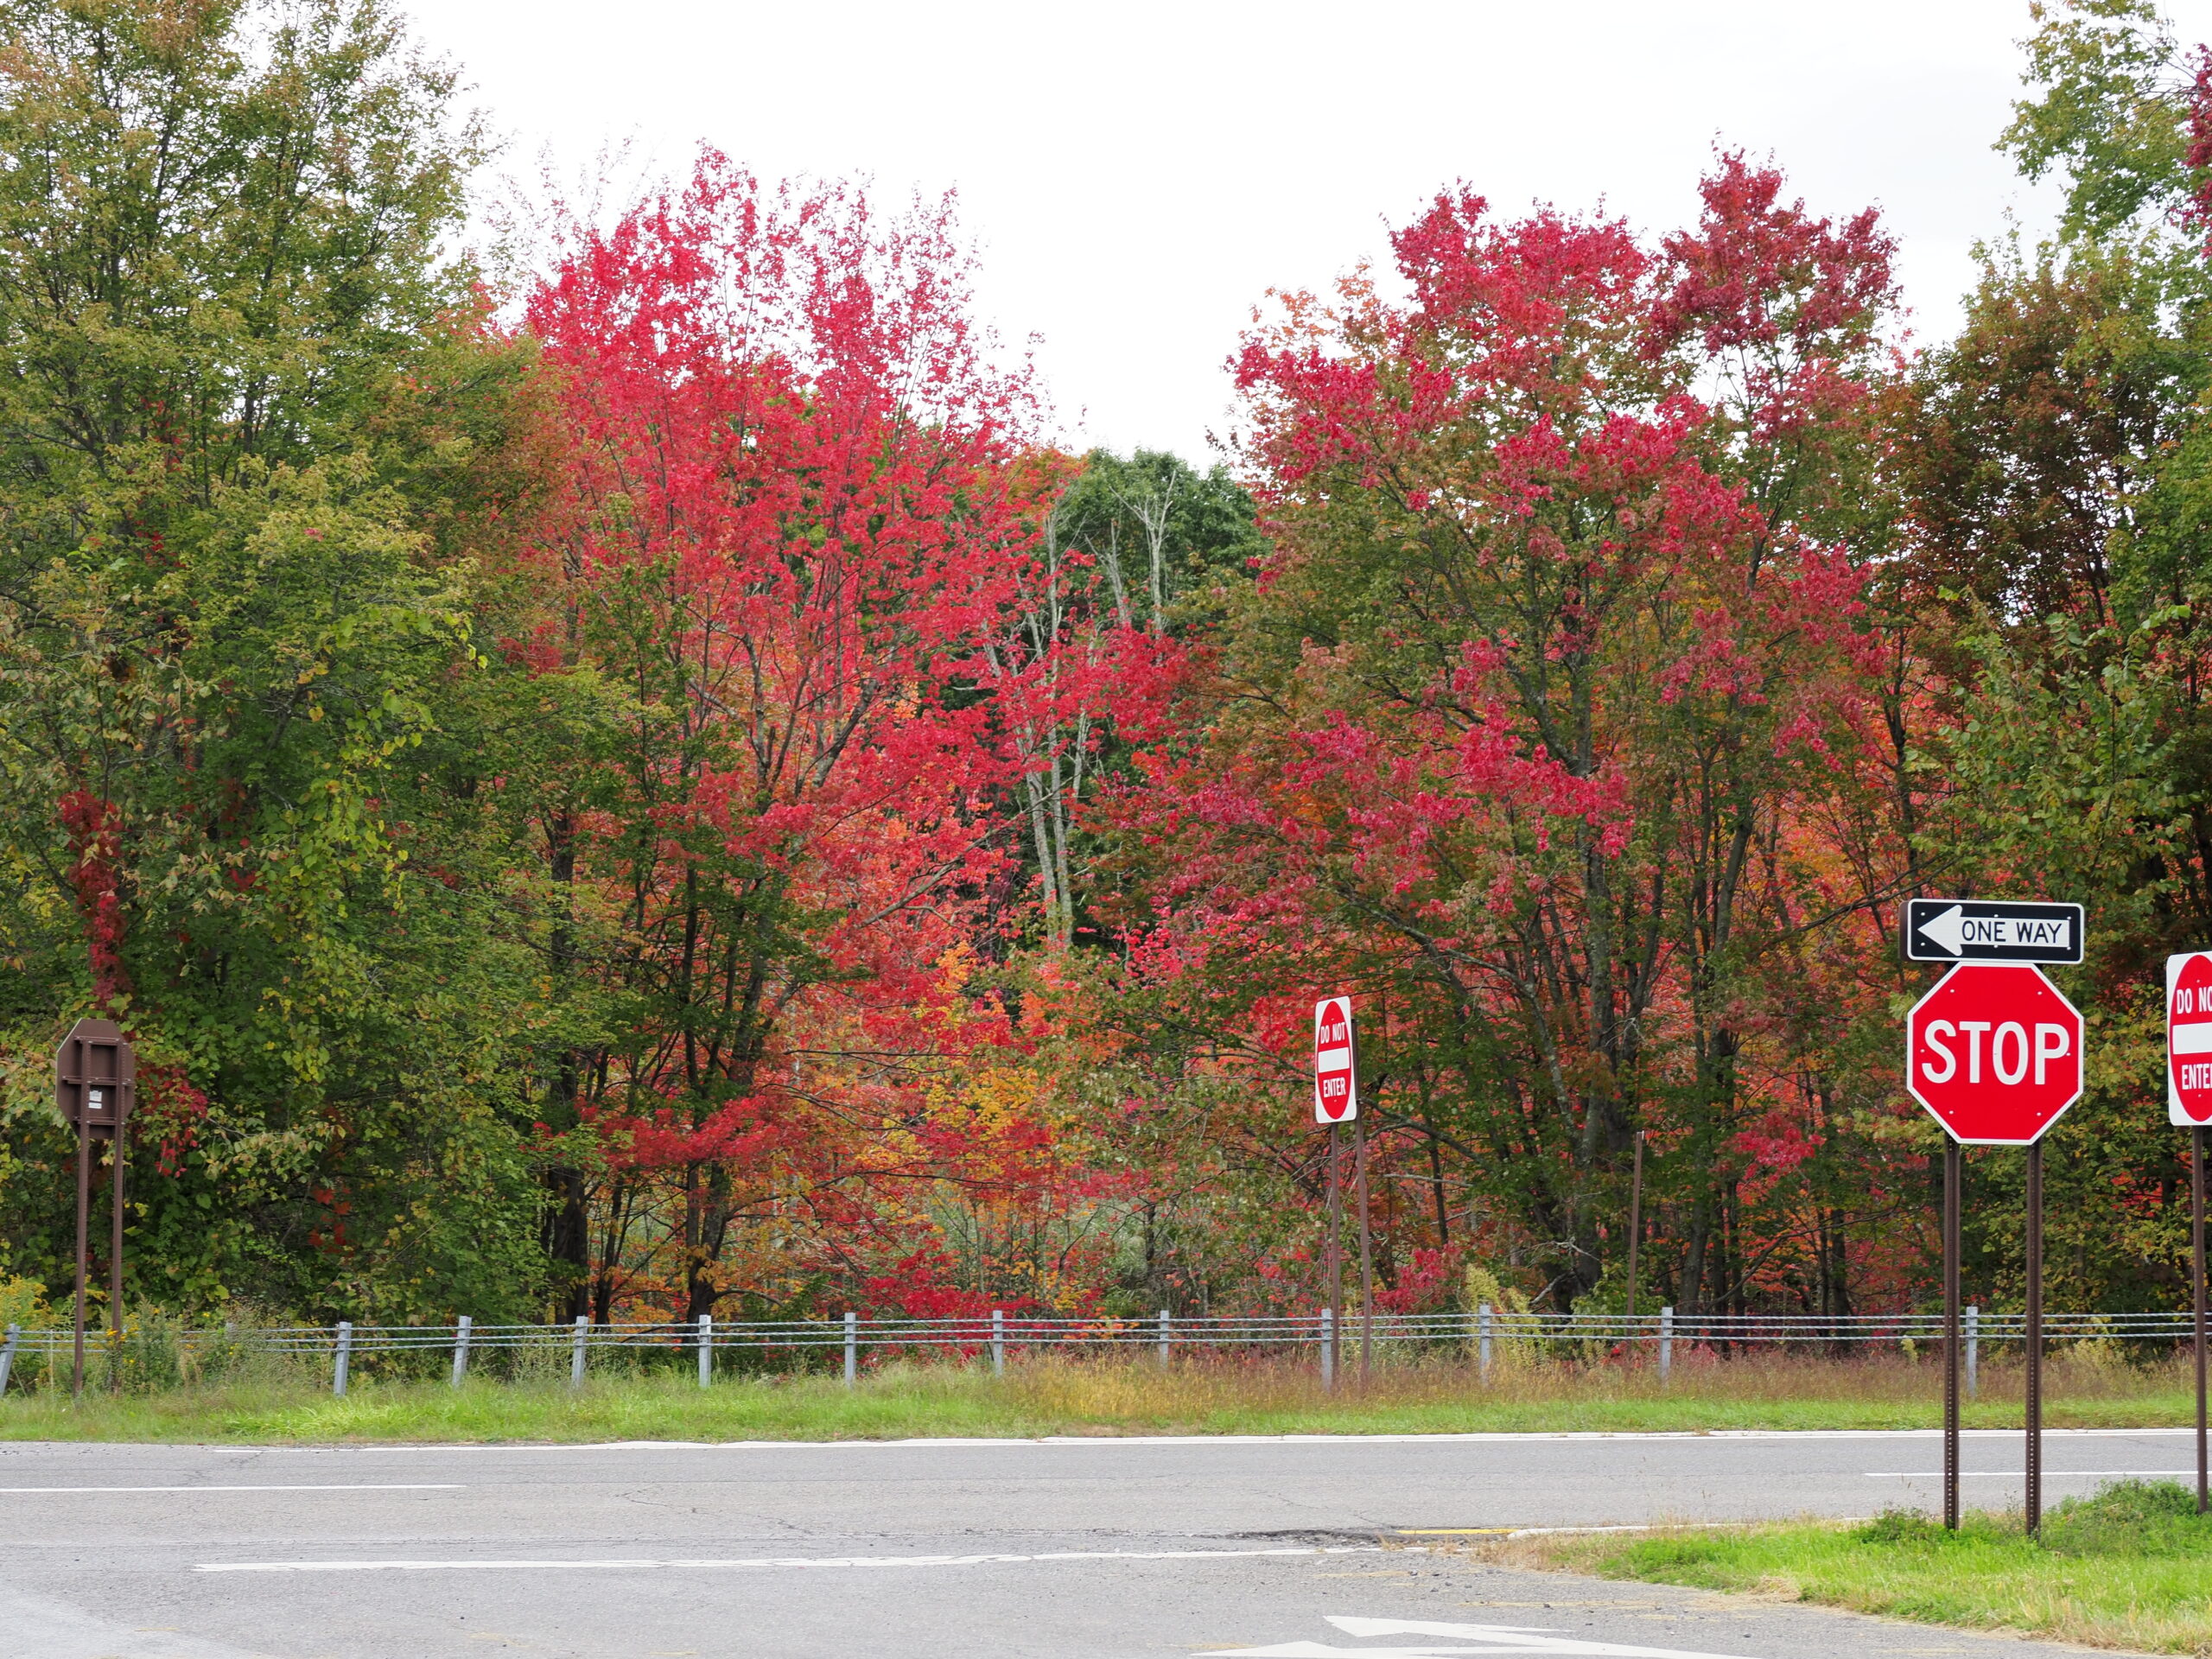 Wetland areas like this one on the side of the Taconic can be great for fall colors as the 